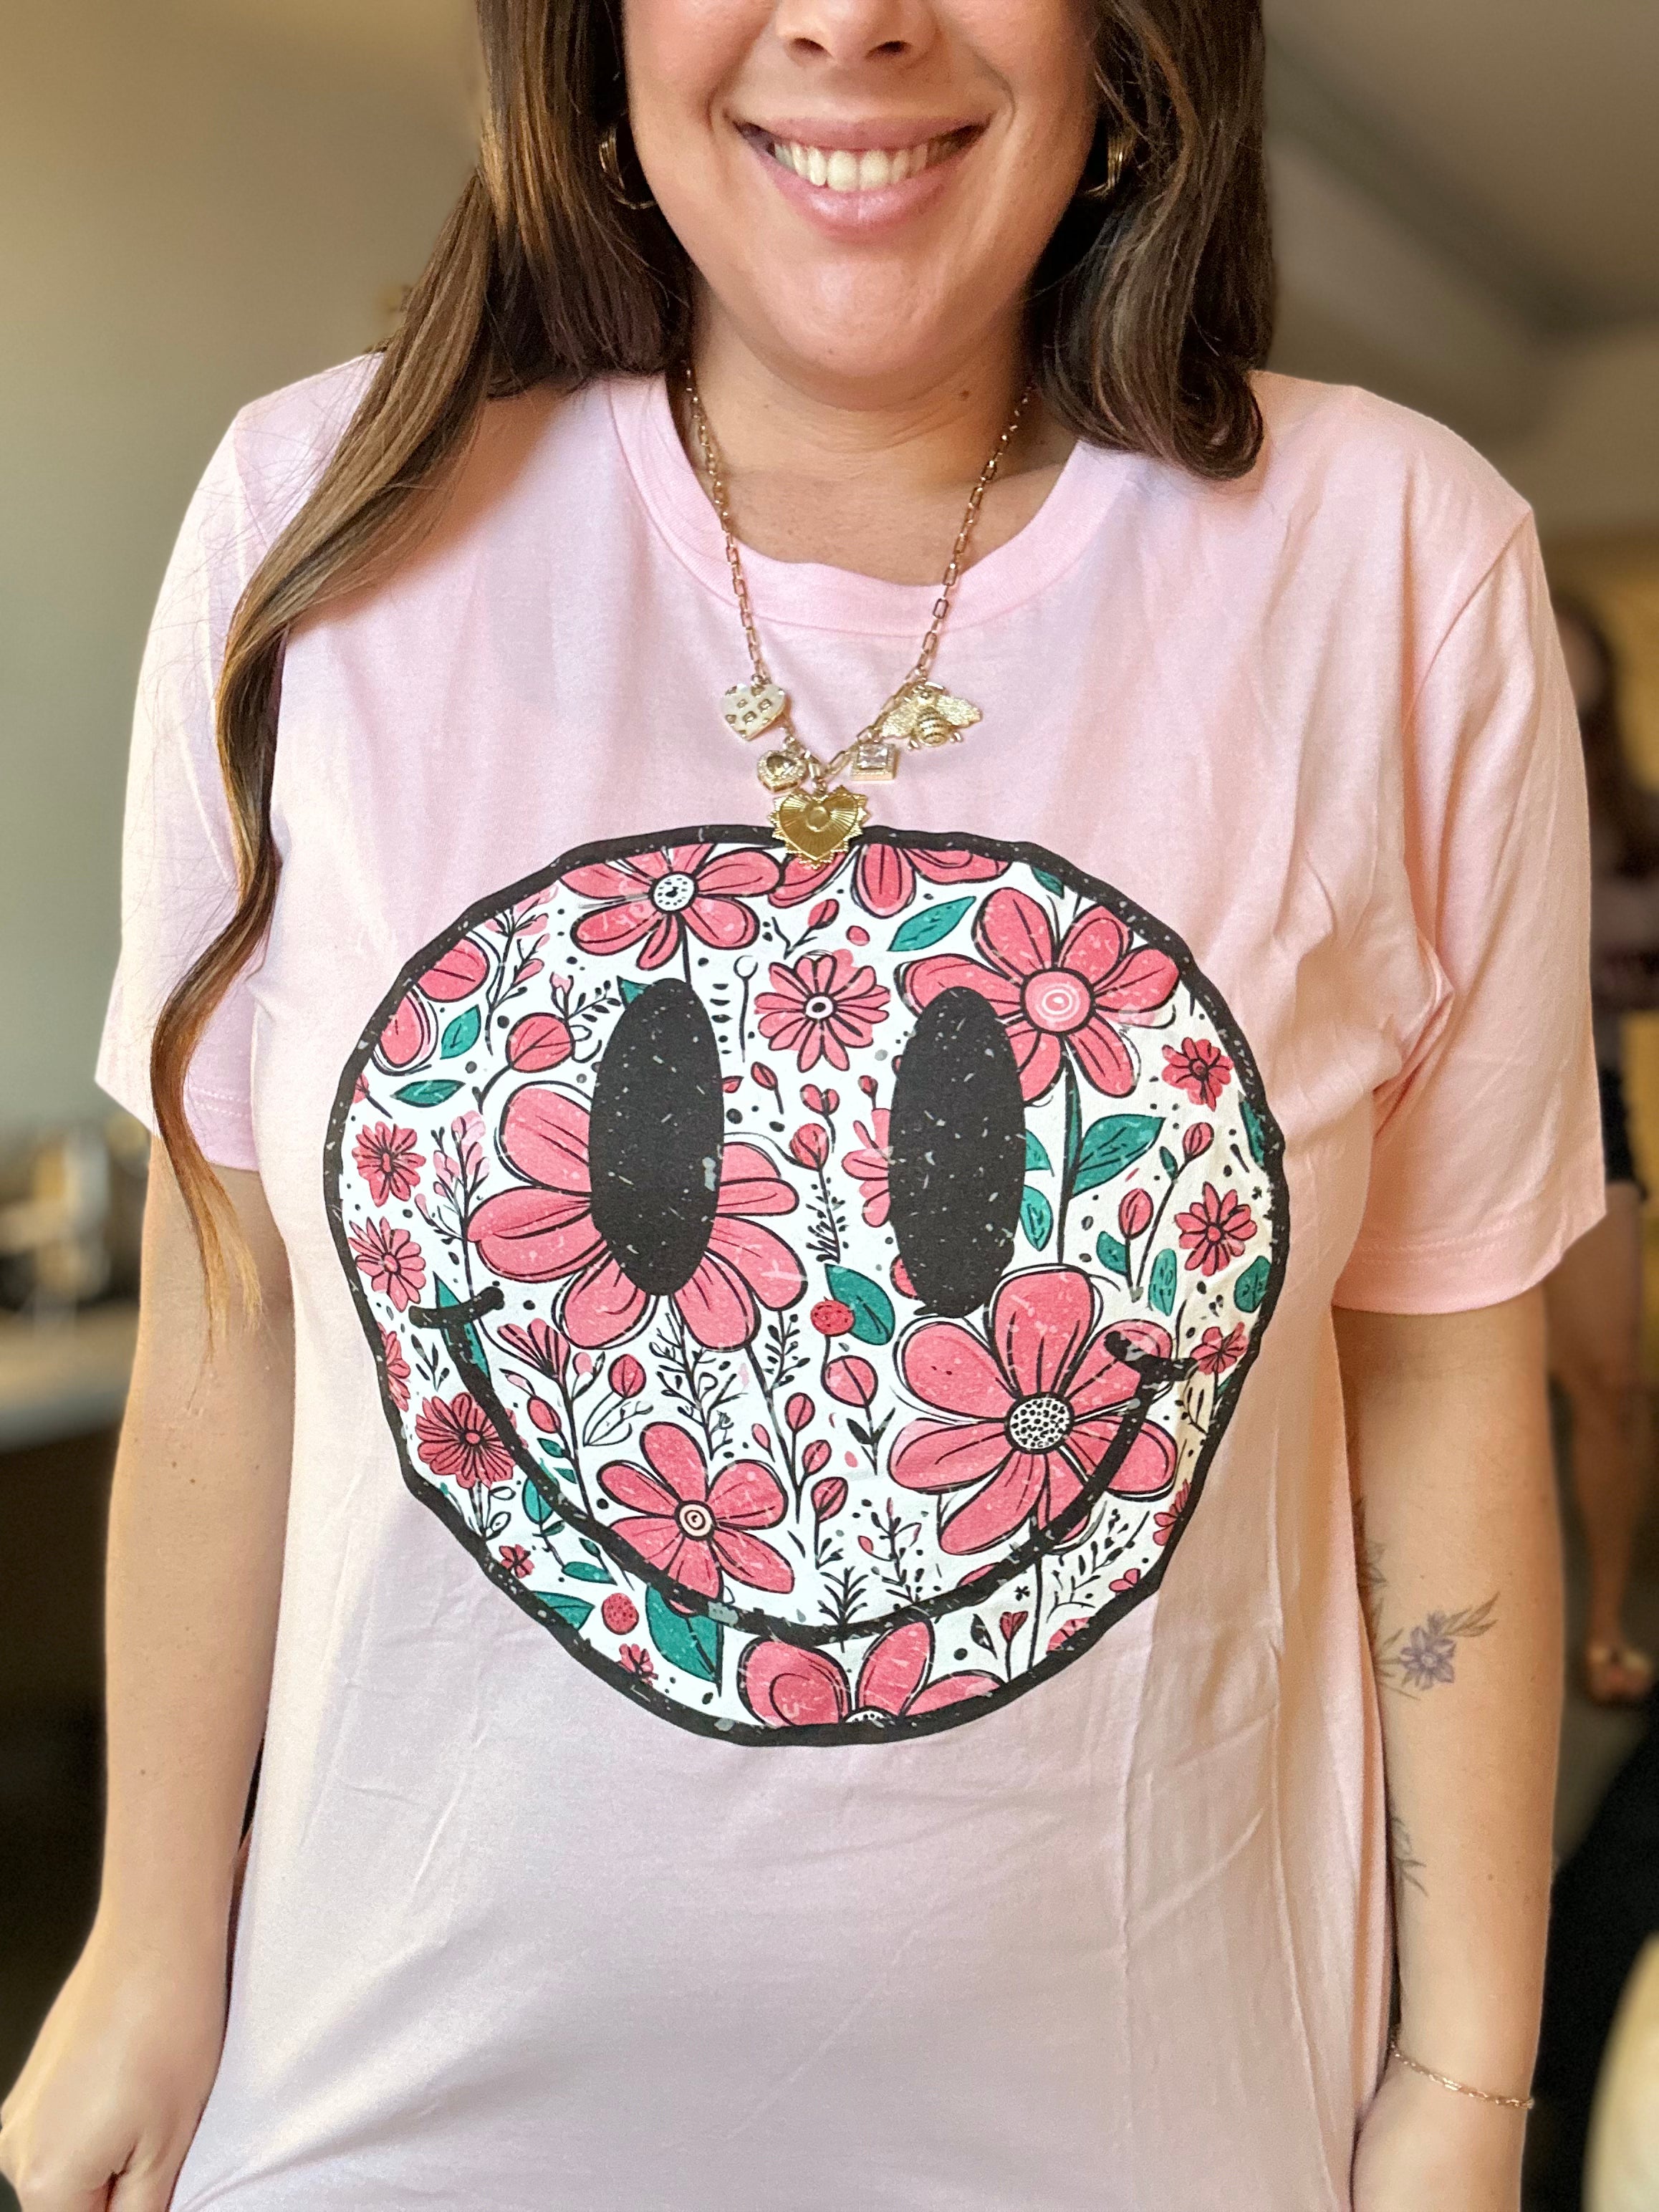 Retro Pink Flower Smiley Graphic Tee-130 Graphic Tees-Heathered Boho-Heathered Boho Boutique, Women's Fashion and Accessories in Palmetto, FL